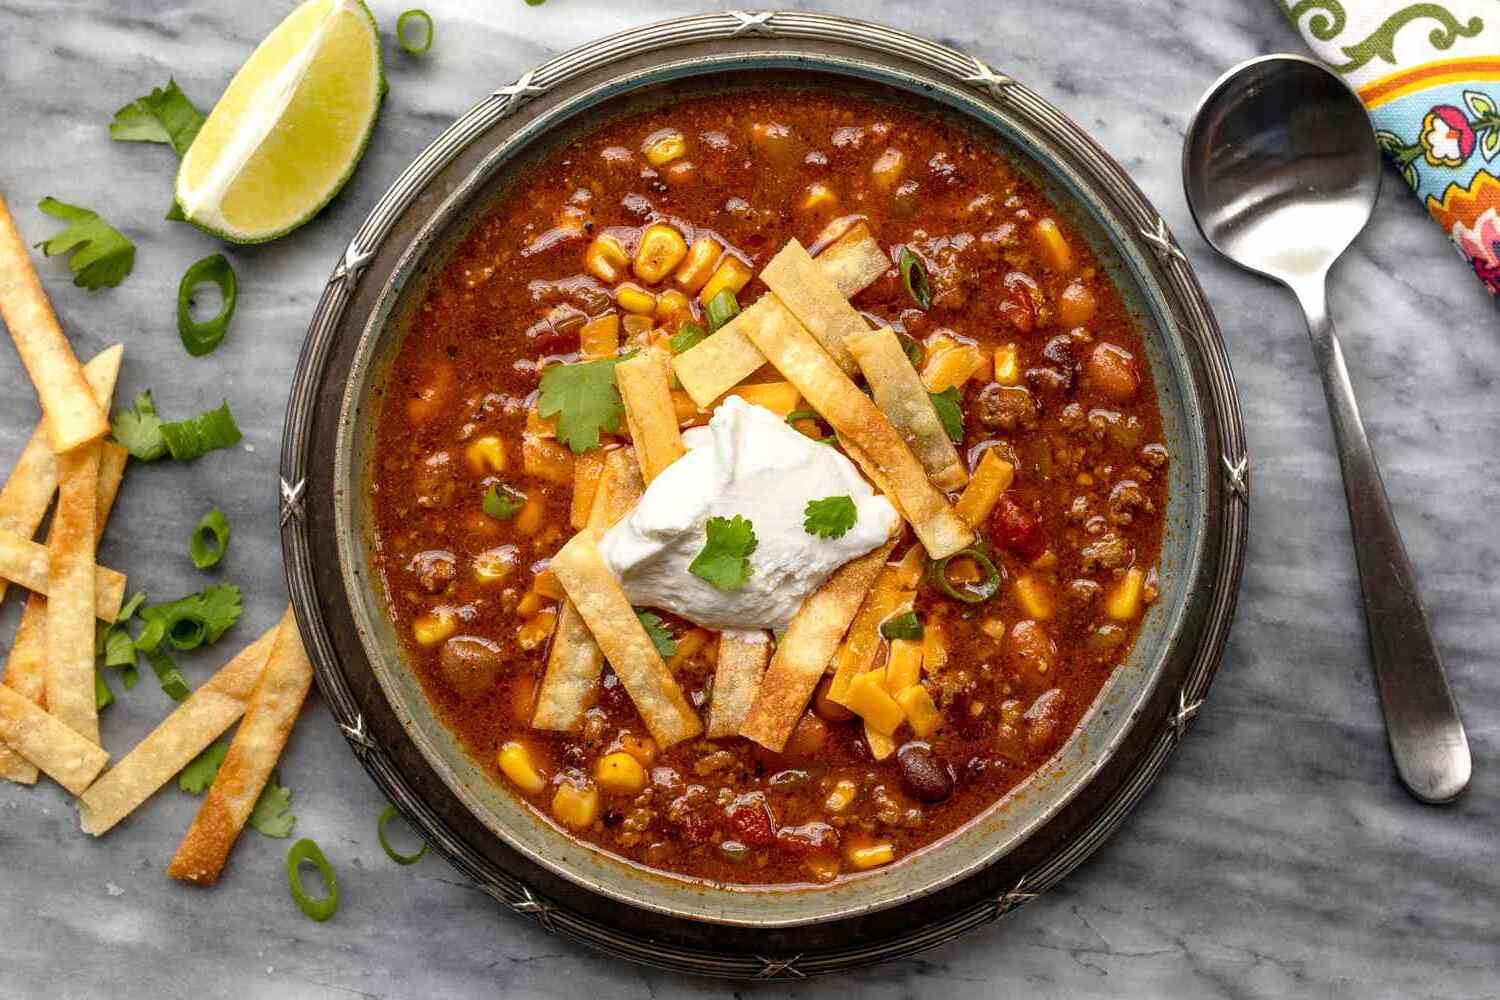 How to Make Taco Soup in the Instant Pot